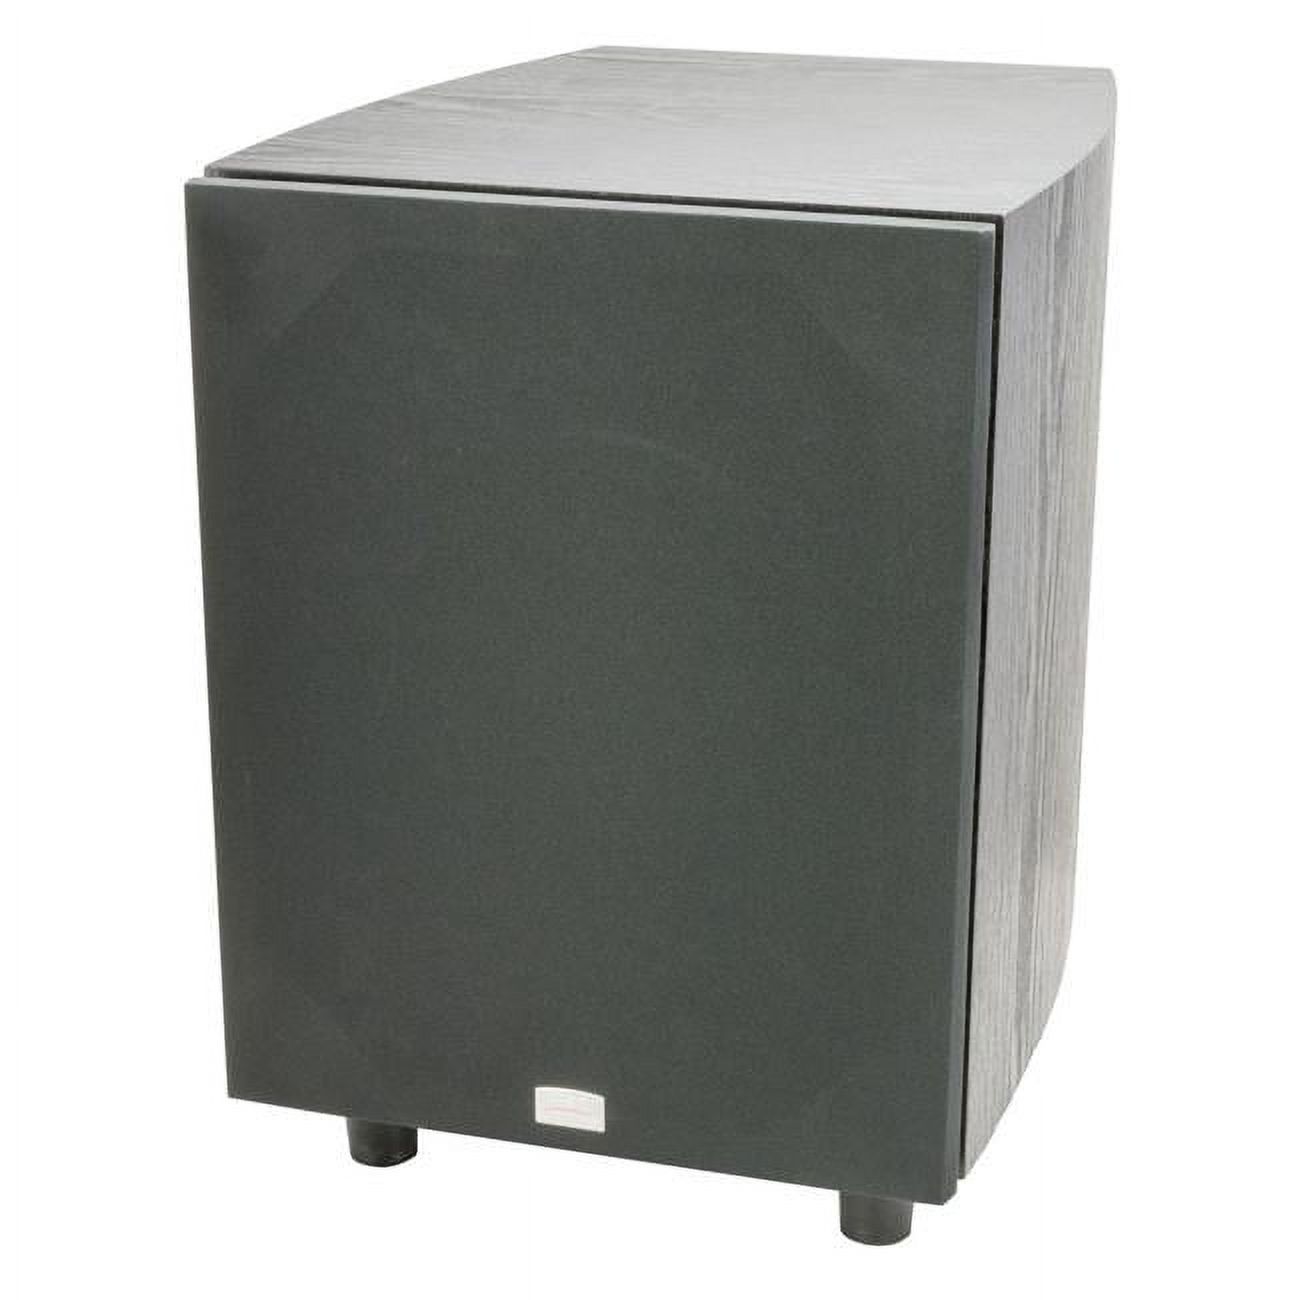 Phase Technology POWER-FL8 8 in. Subwoofer with a Passive Radiator&#44; Black Ash - image 1 of 6